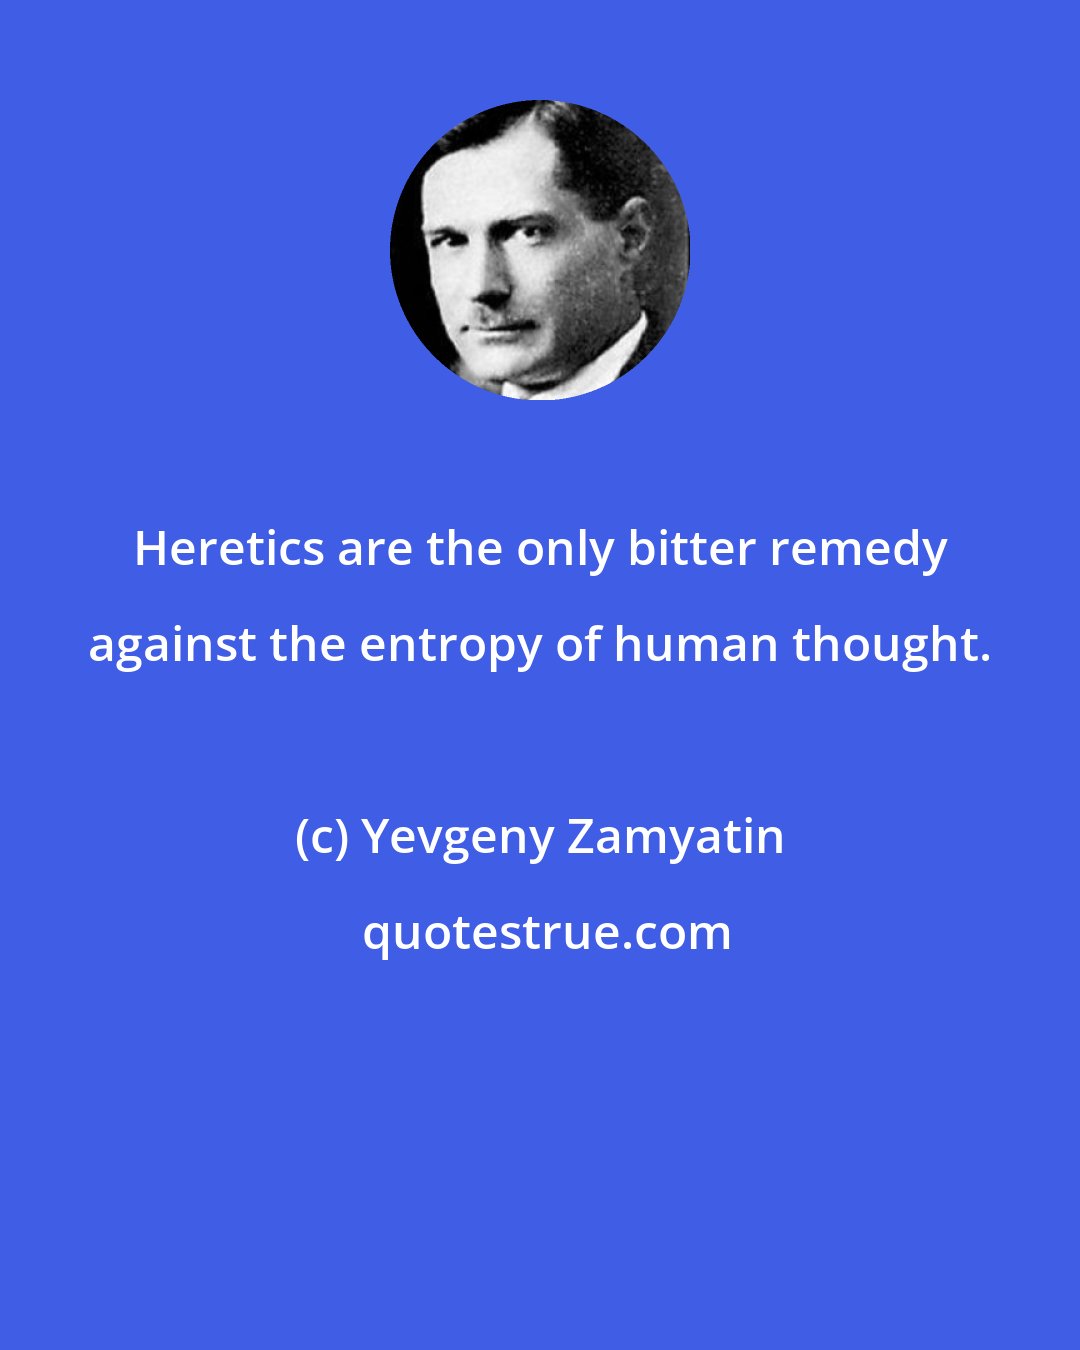 Yevgeny Zamyatin: Heretics are the only bitter remedy against the entropy of human thought.